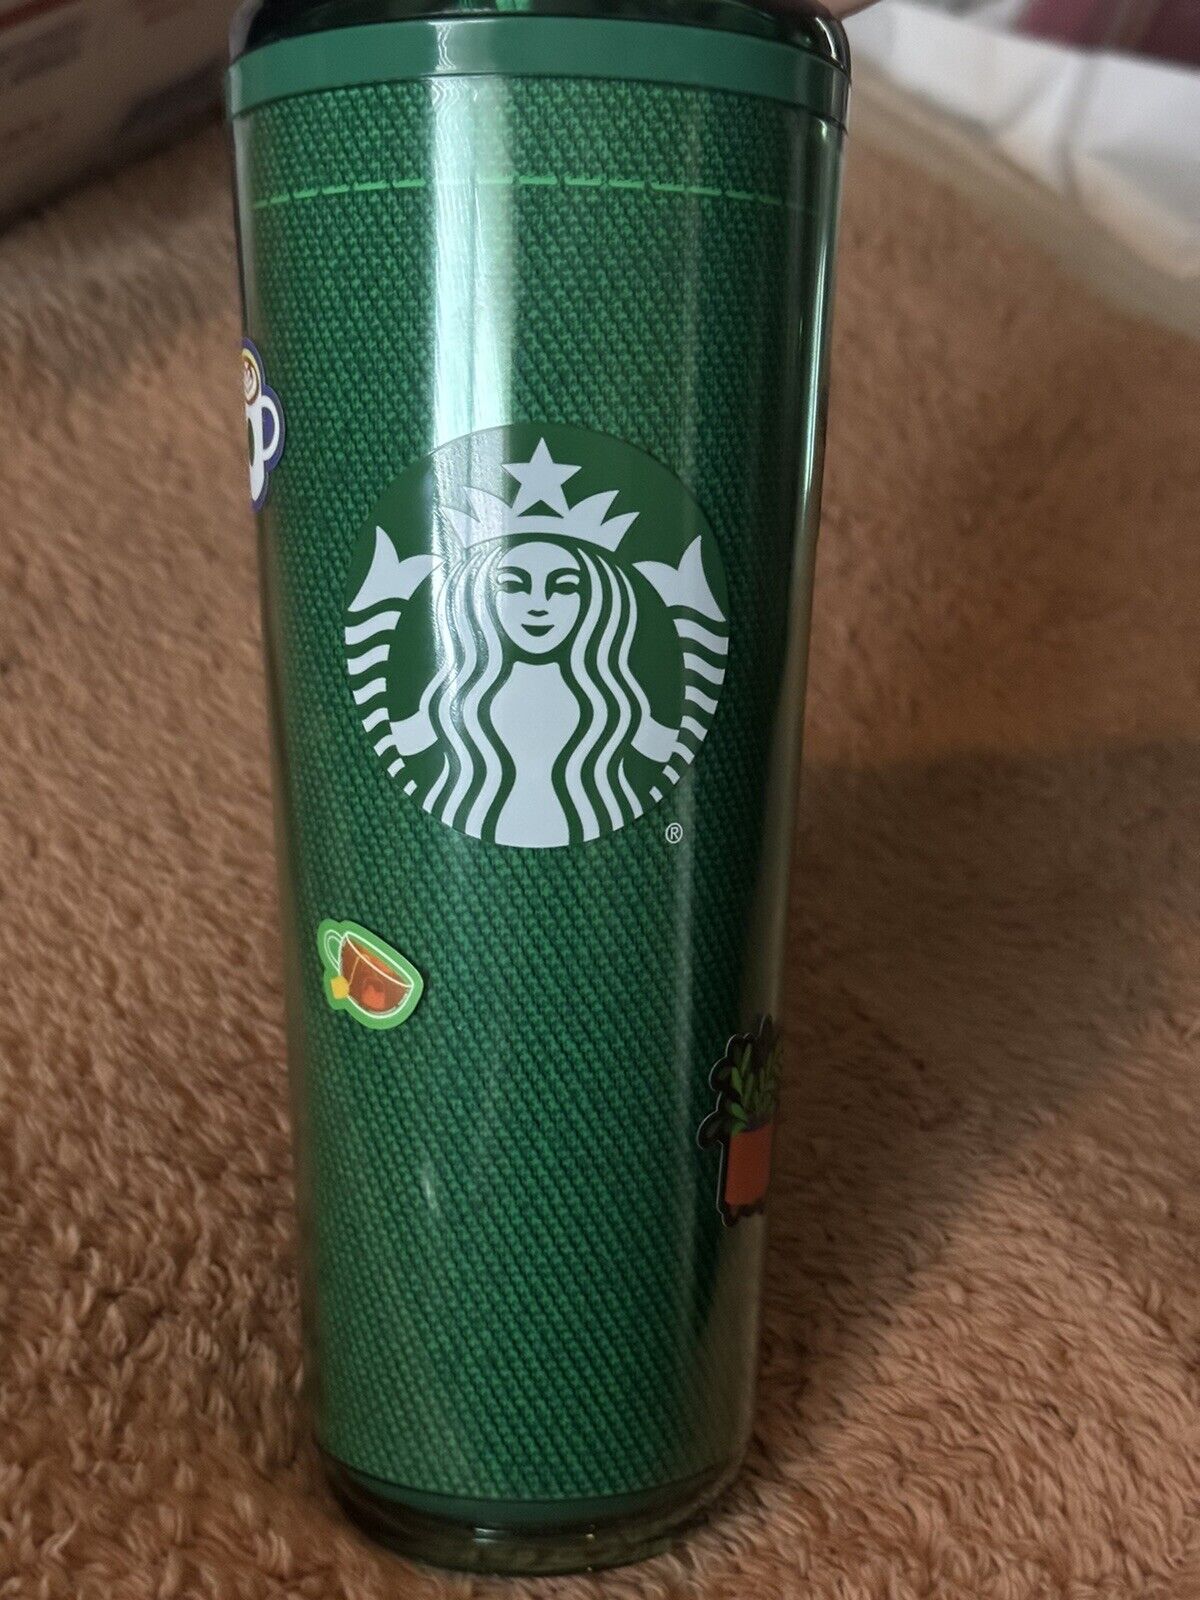 Starbucks Apron Cup Brand new. Just Released To Employees Only, Today May 3, ‘24